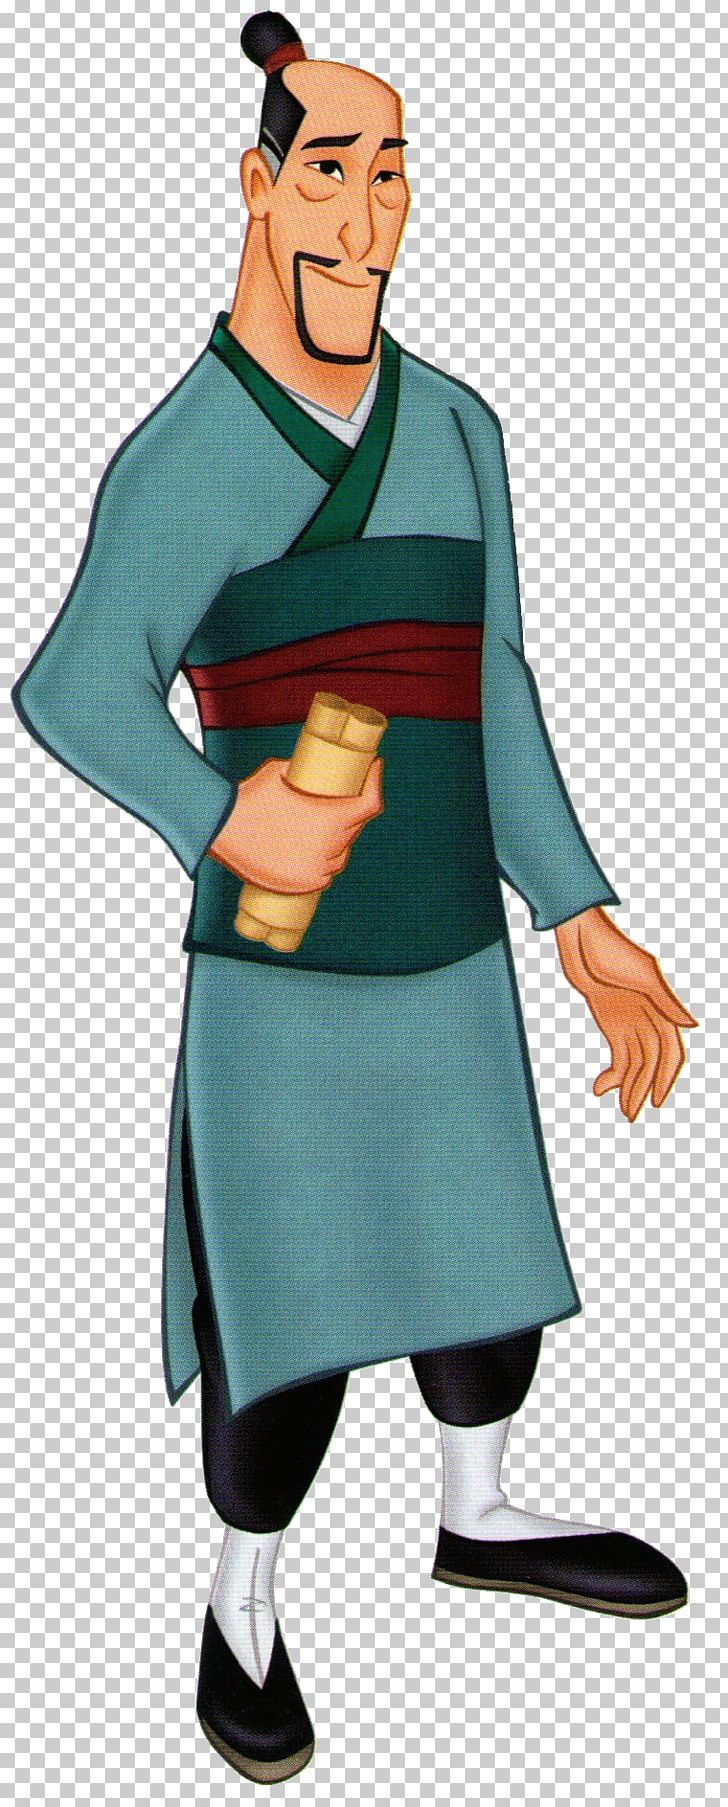 Fa Mulan Fa Zhou Soon-Tek Oh Rapunzel PNG, Clipart, Character, Clothing, Costume, Costume Design, Cricket Free PNG Download